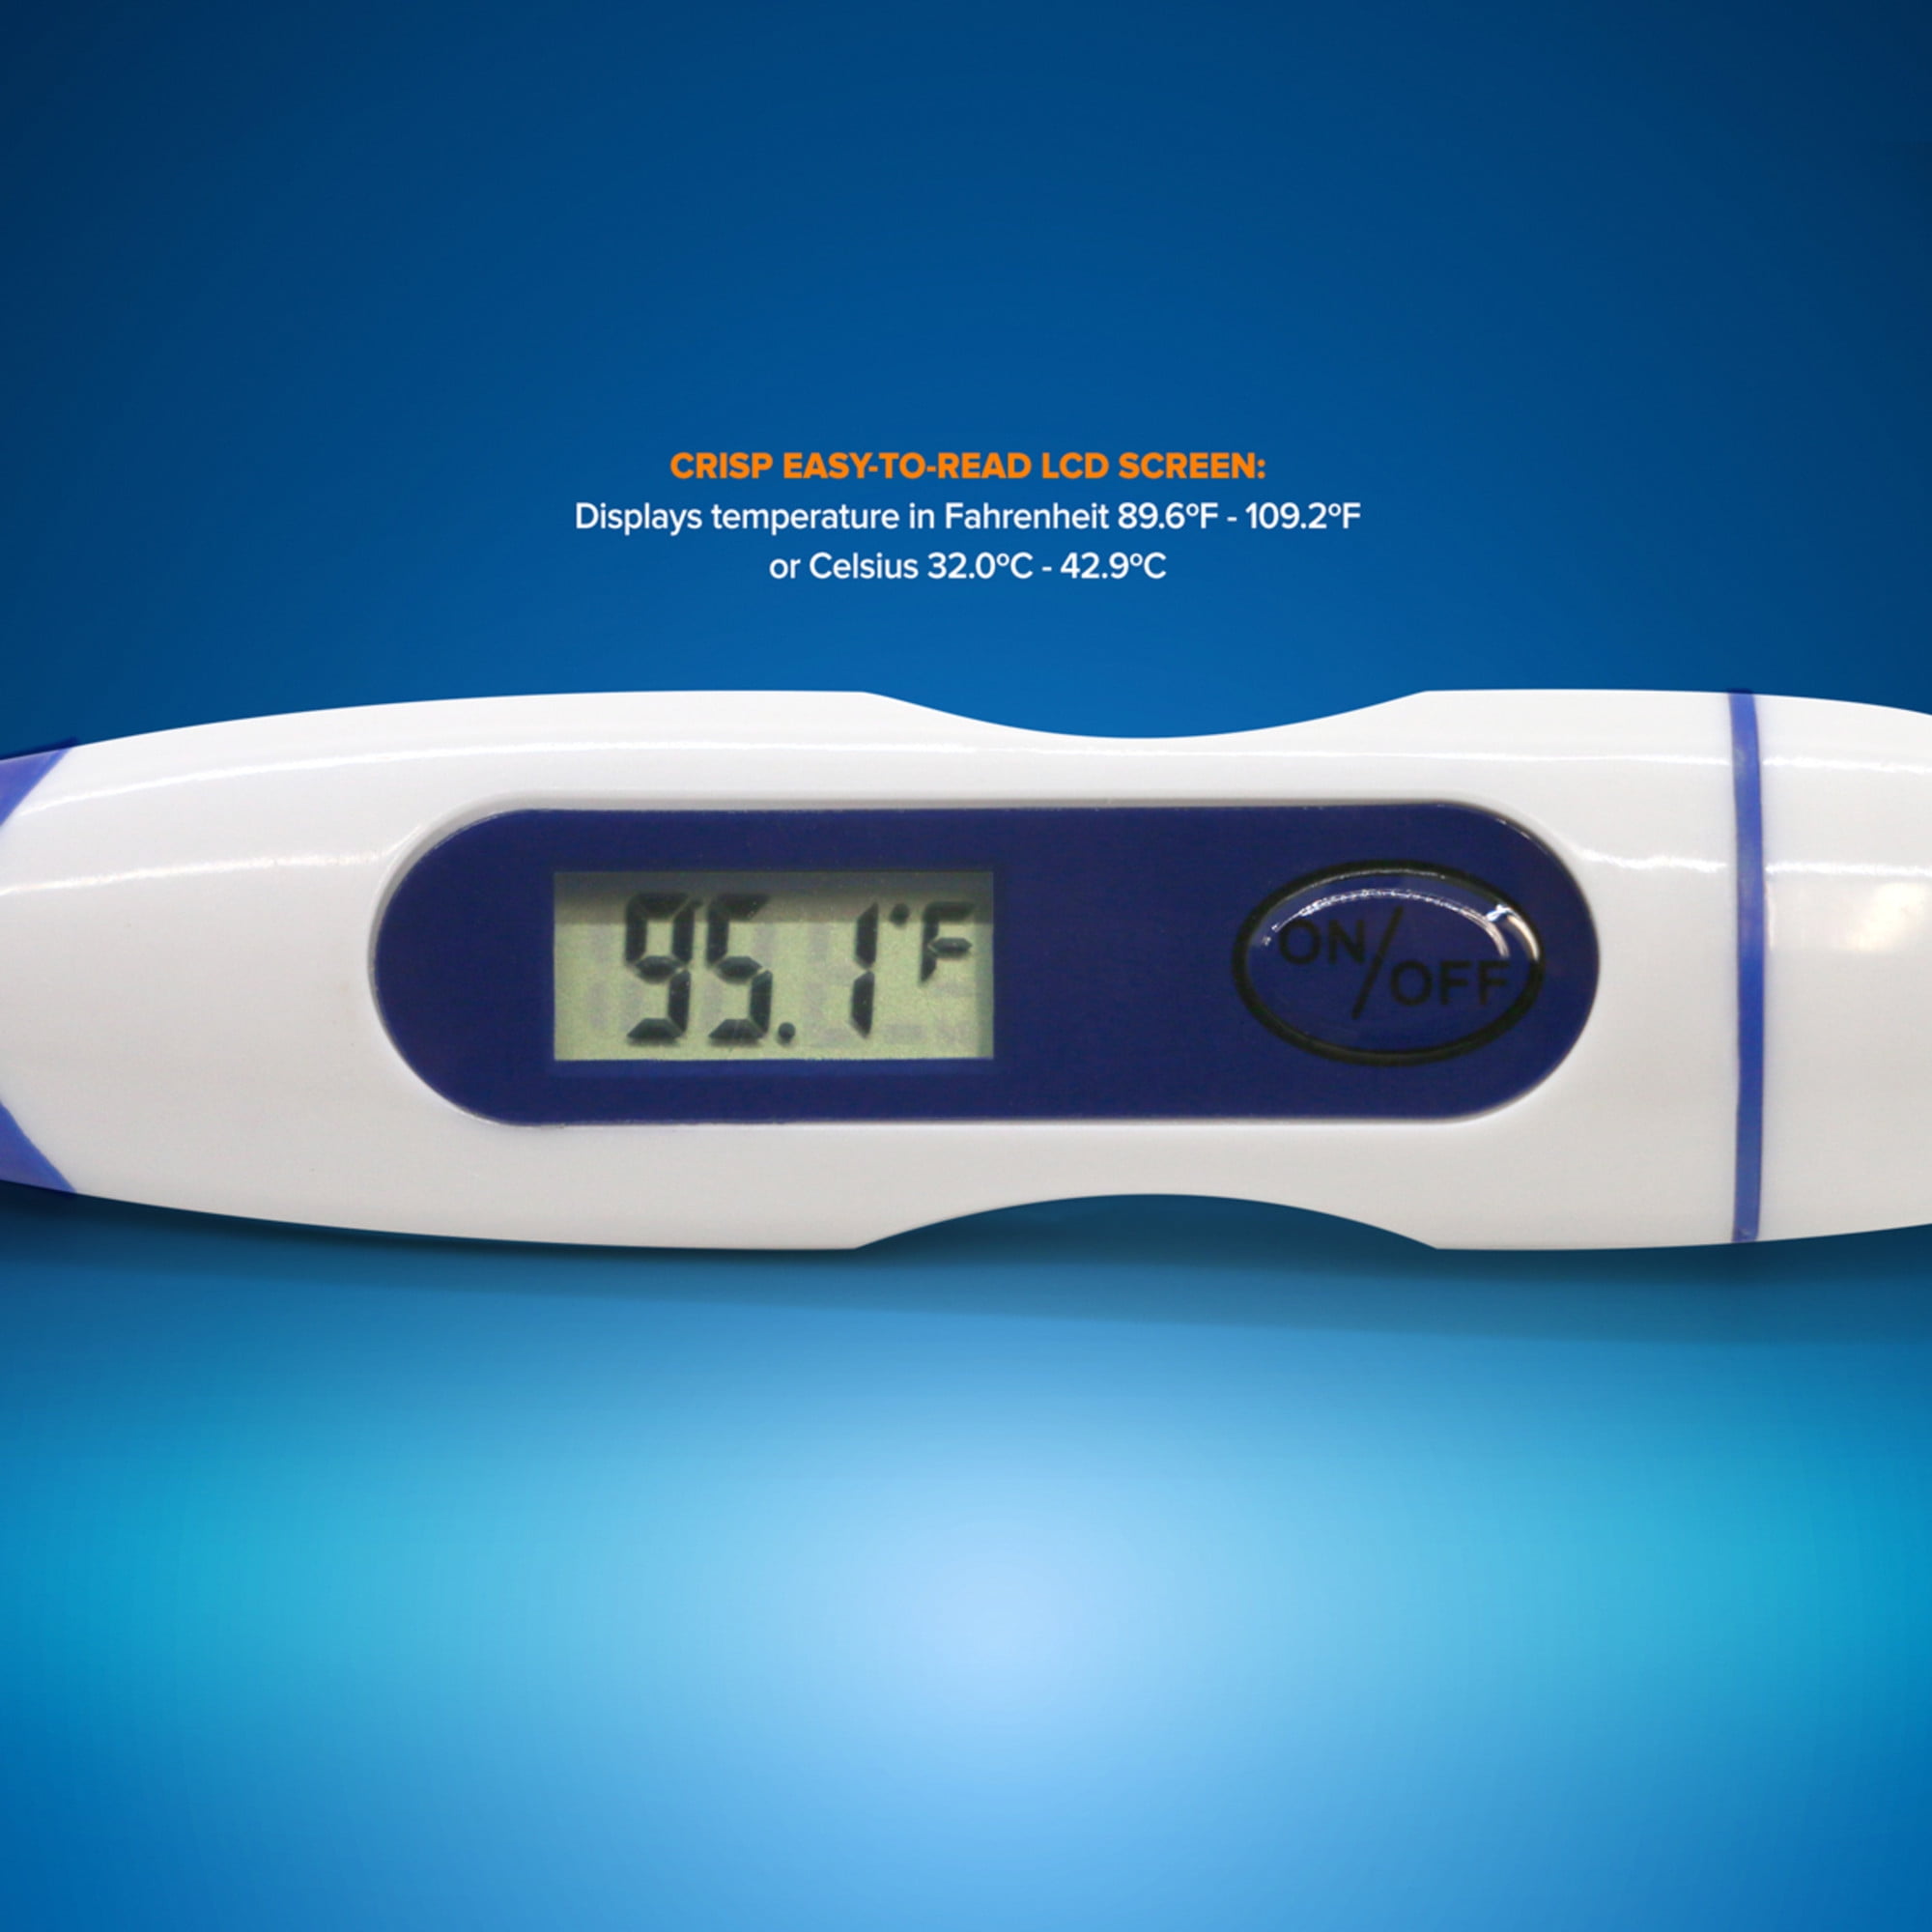 Digital Medical Body Thermometer With Beeper Fast 1 Minute Readout New In  Box